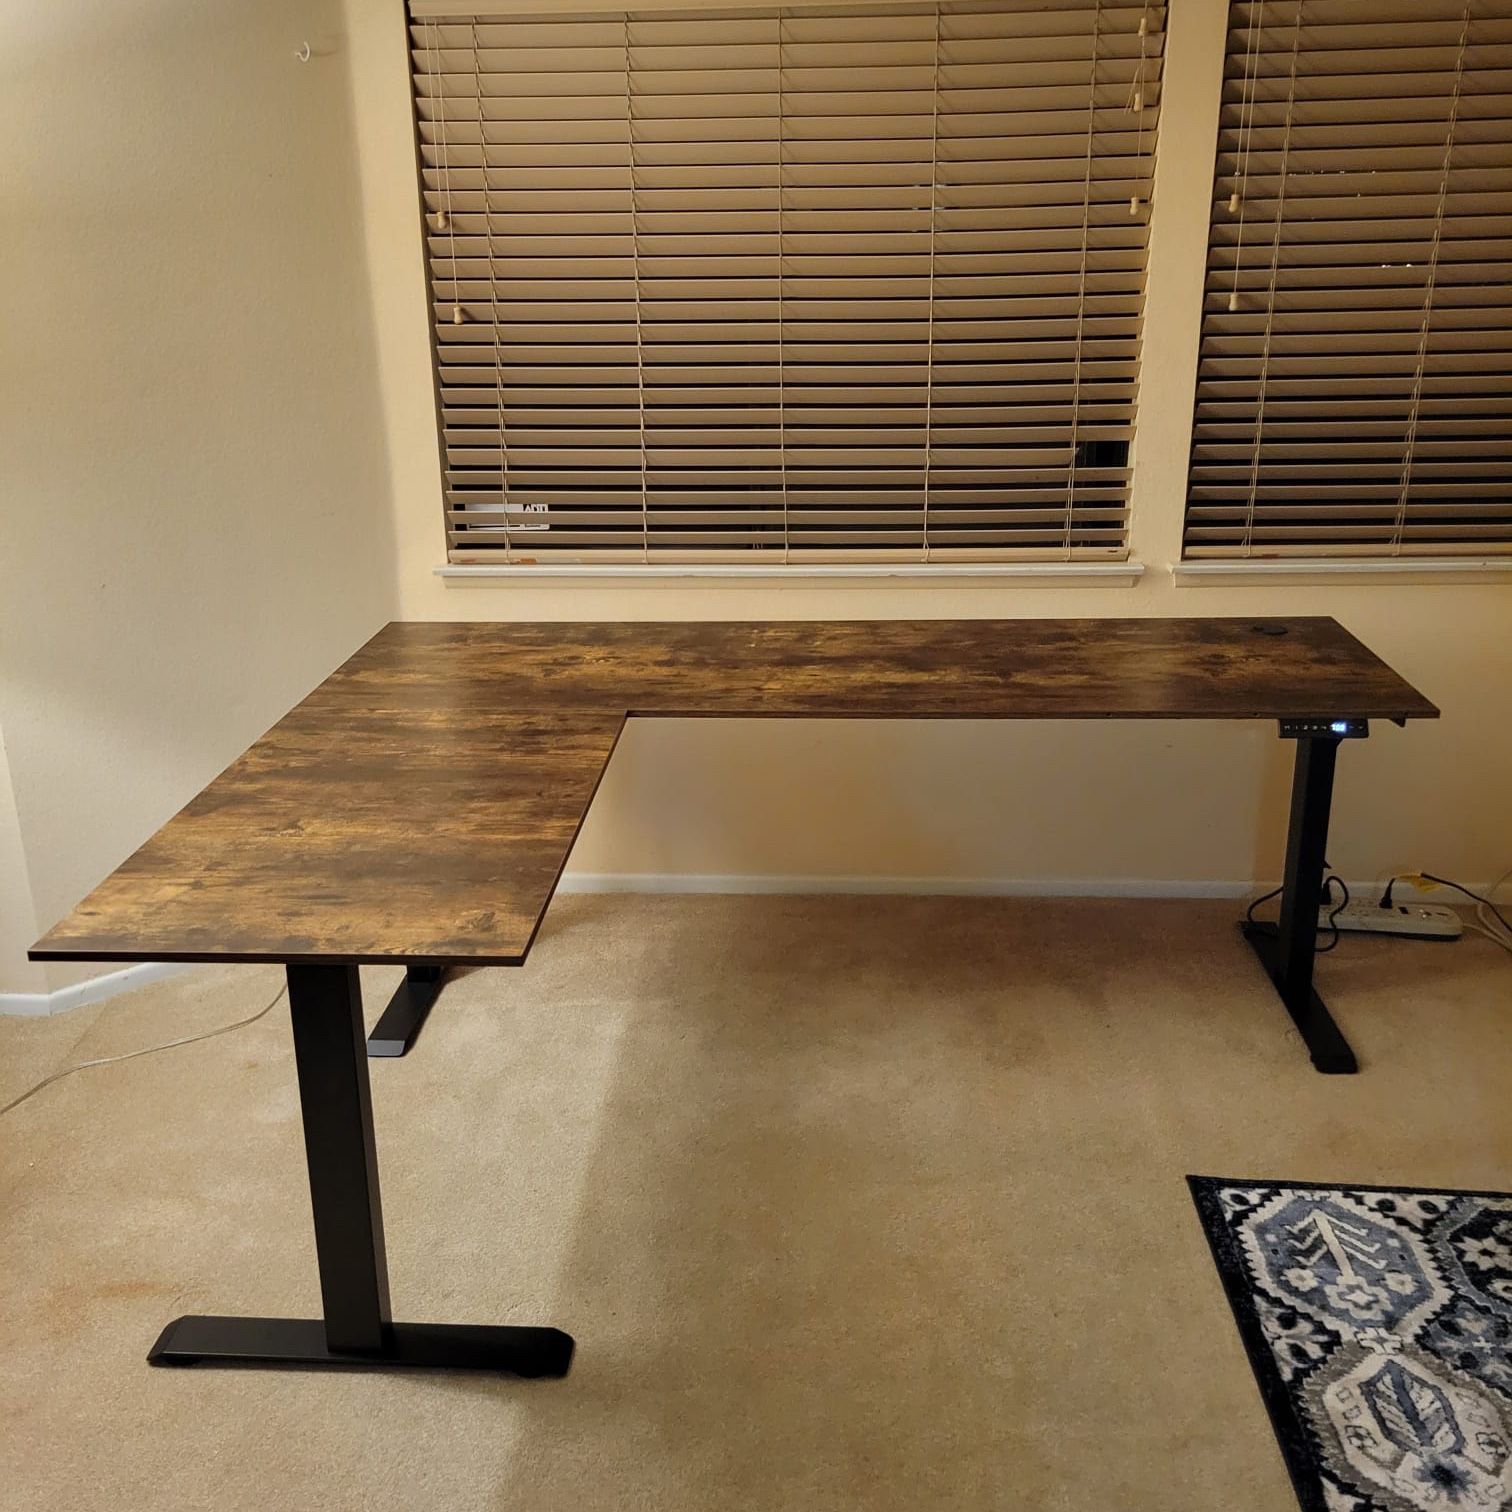 Electric Adjustable Height L-Shaped Desk - 78" Length x 60" Width x 24"/48" Height, Nice Wood Finish - Brand New!